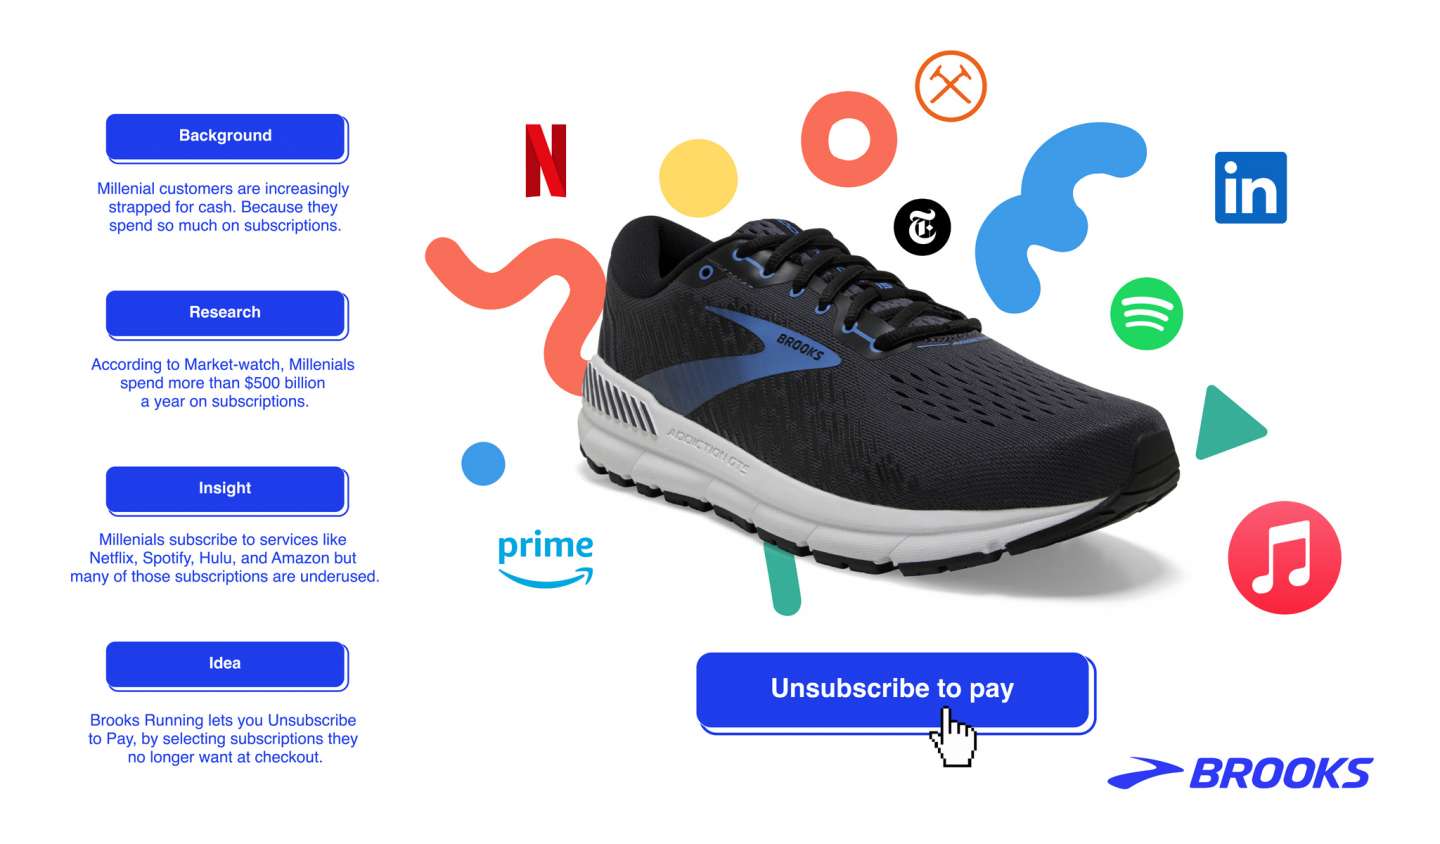 Brooks Running: Unsubscribe to pay